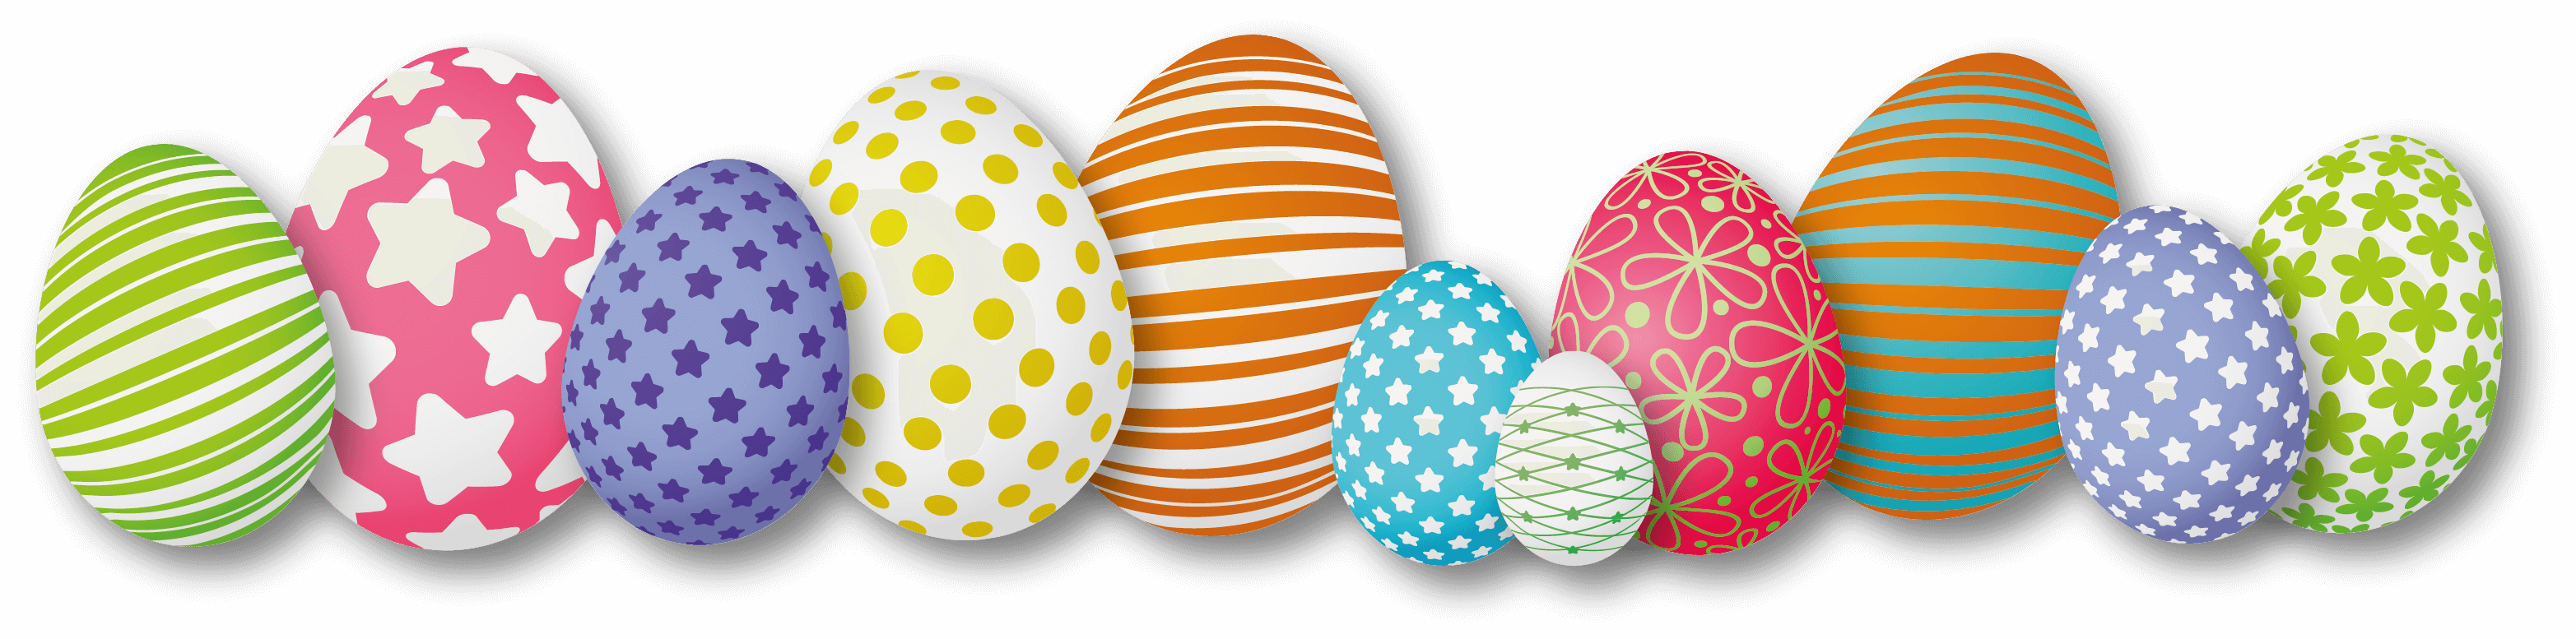 Eggs Easter Colorful Download Free Image PNG Image